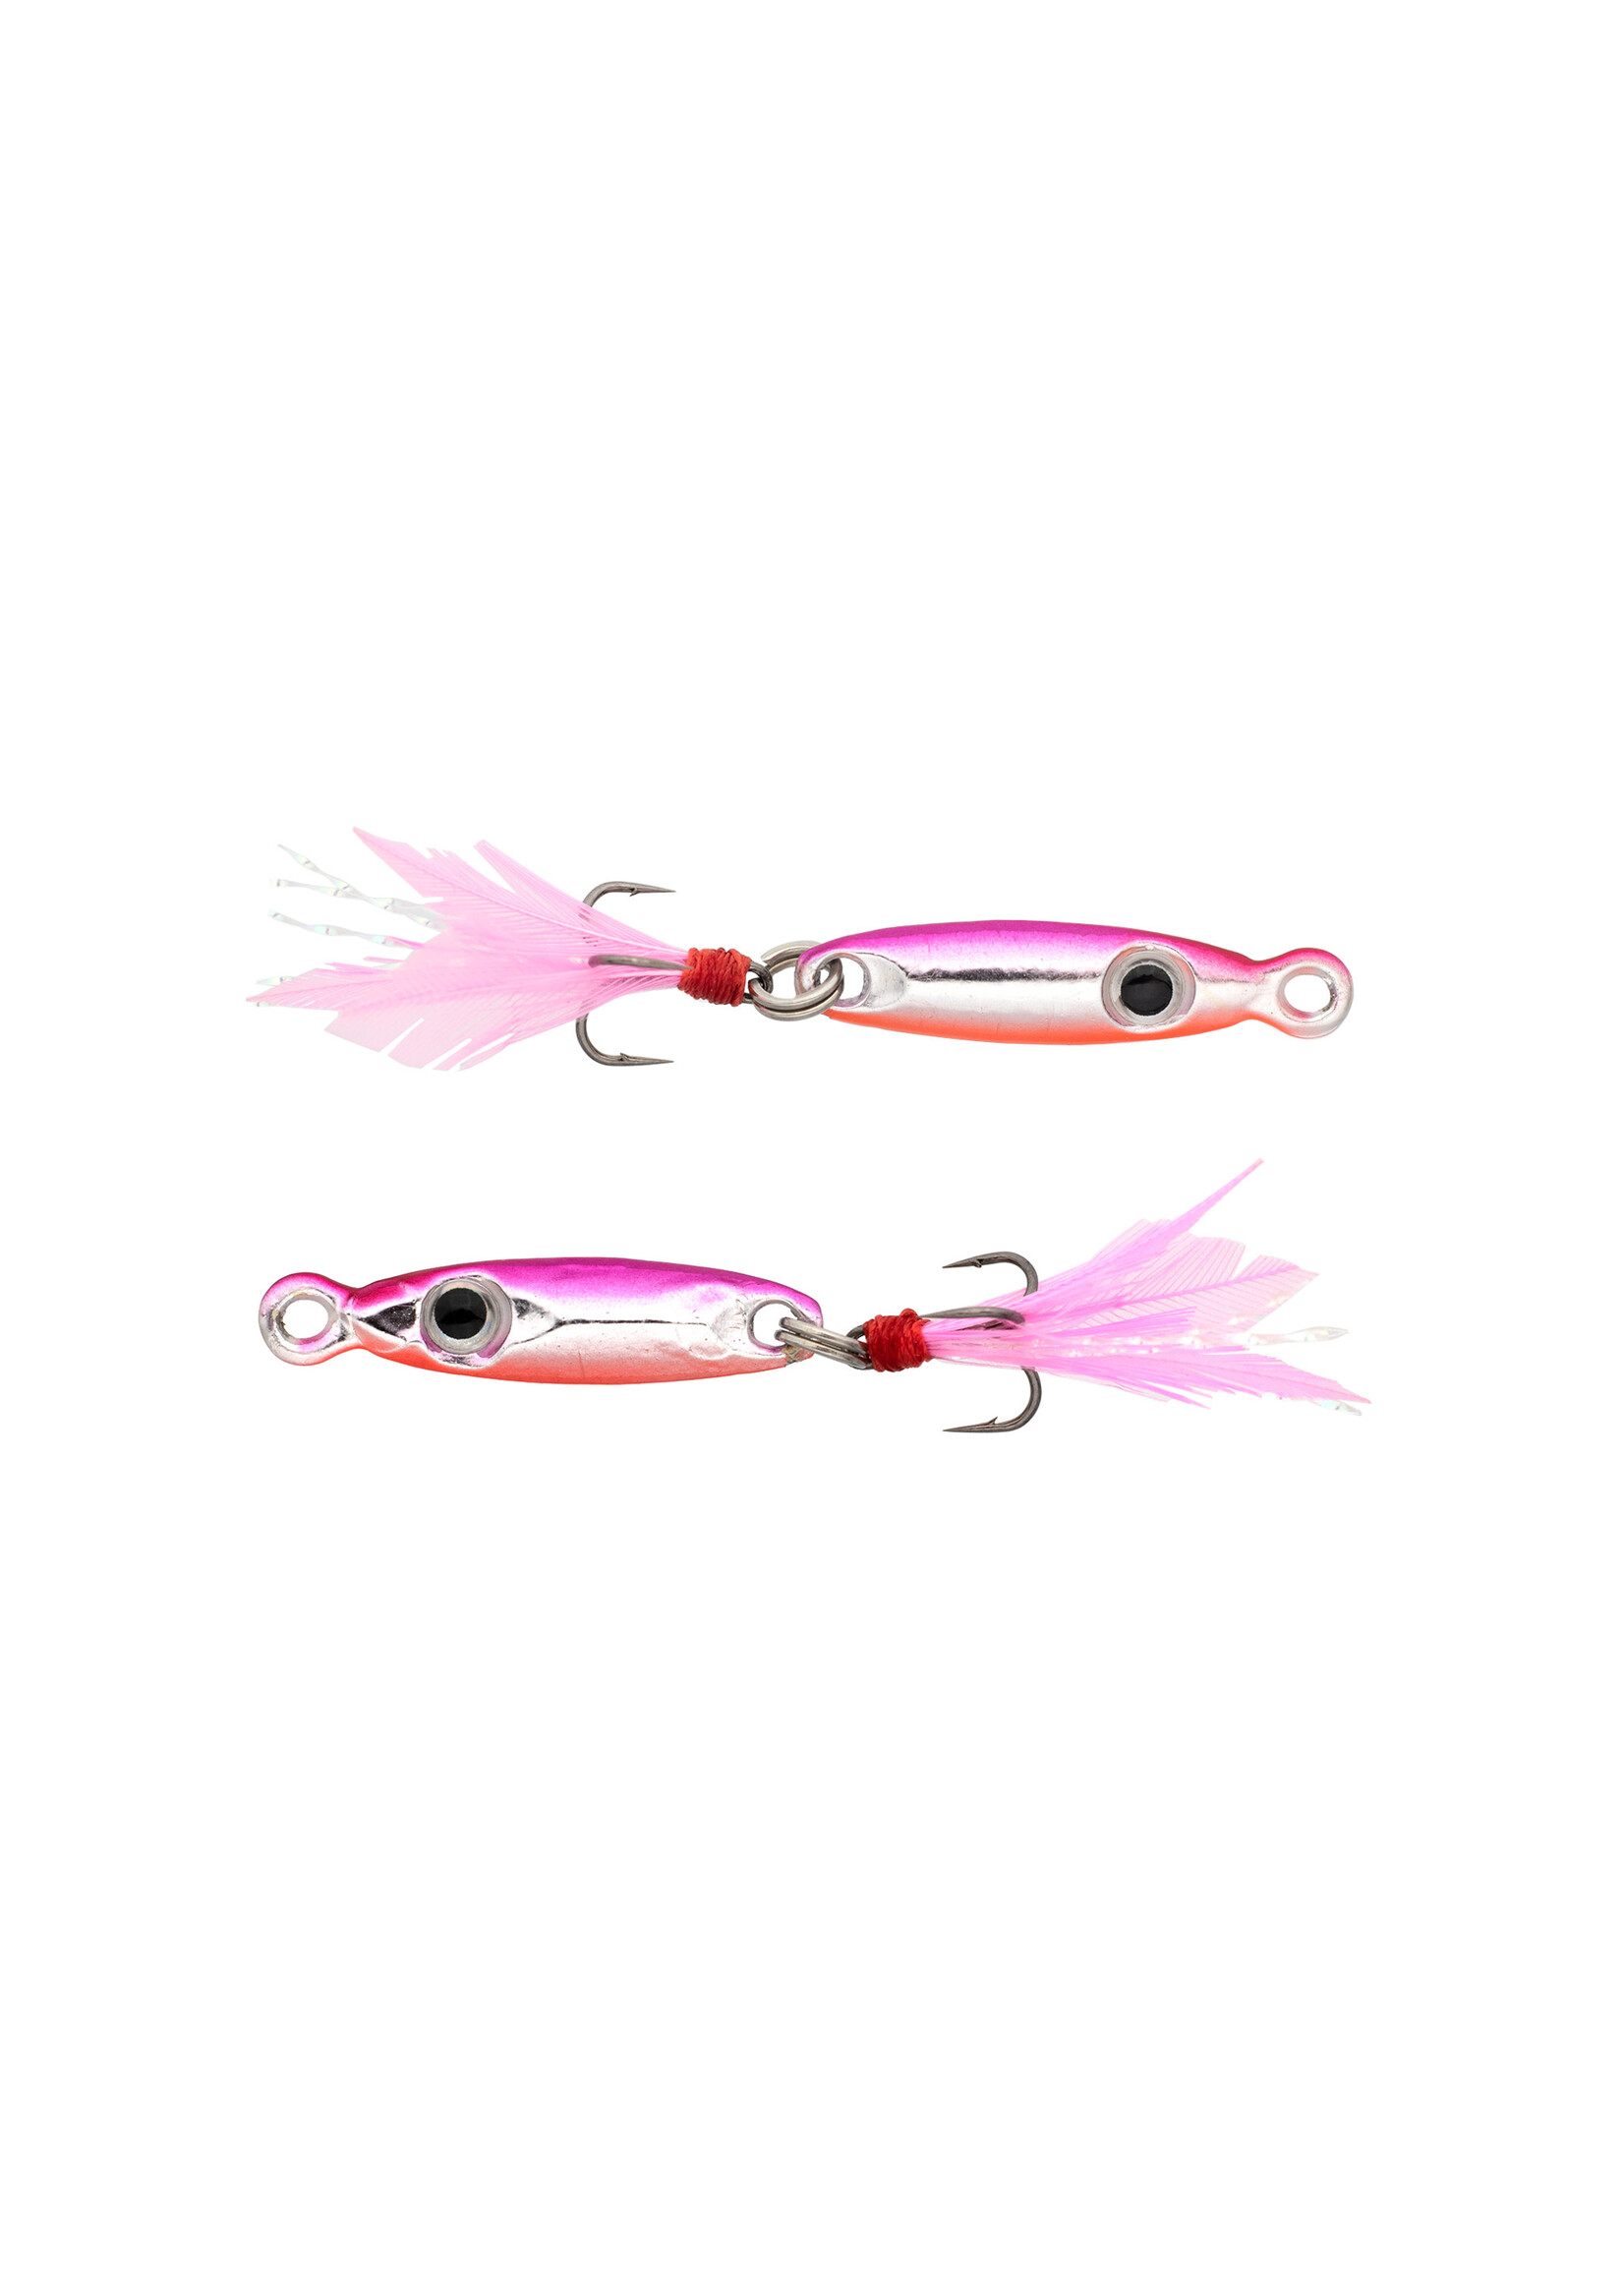 Eurotackle Eurotackle T-Flasher